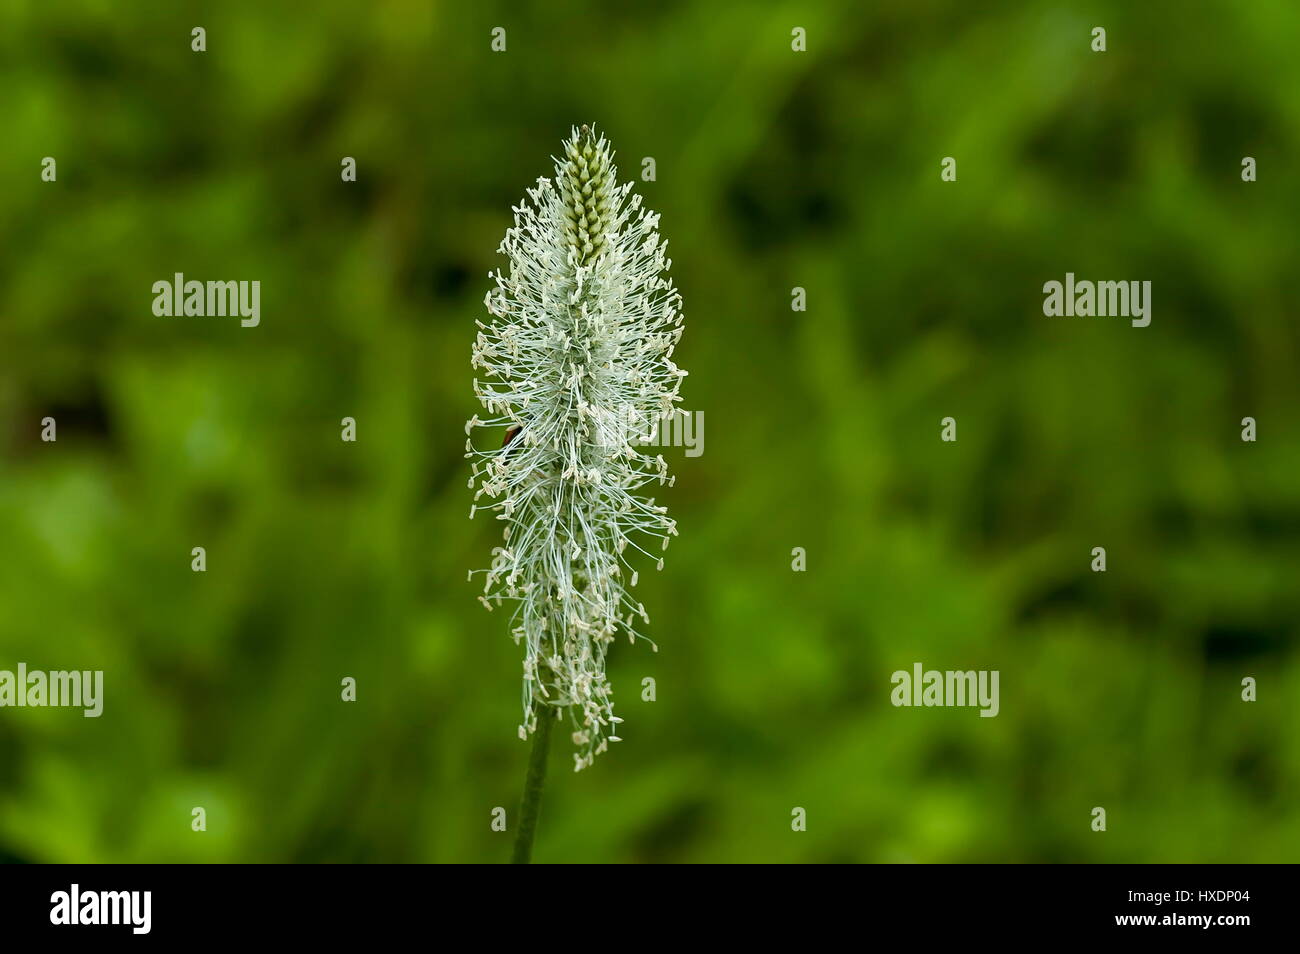 Photograph of plantain or plantago flower blooming in springtime, Sofia, Bulgaria Stock Photo